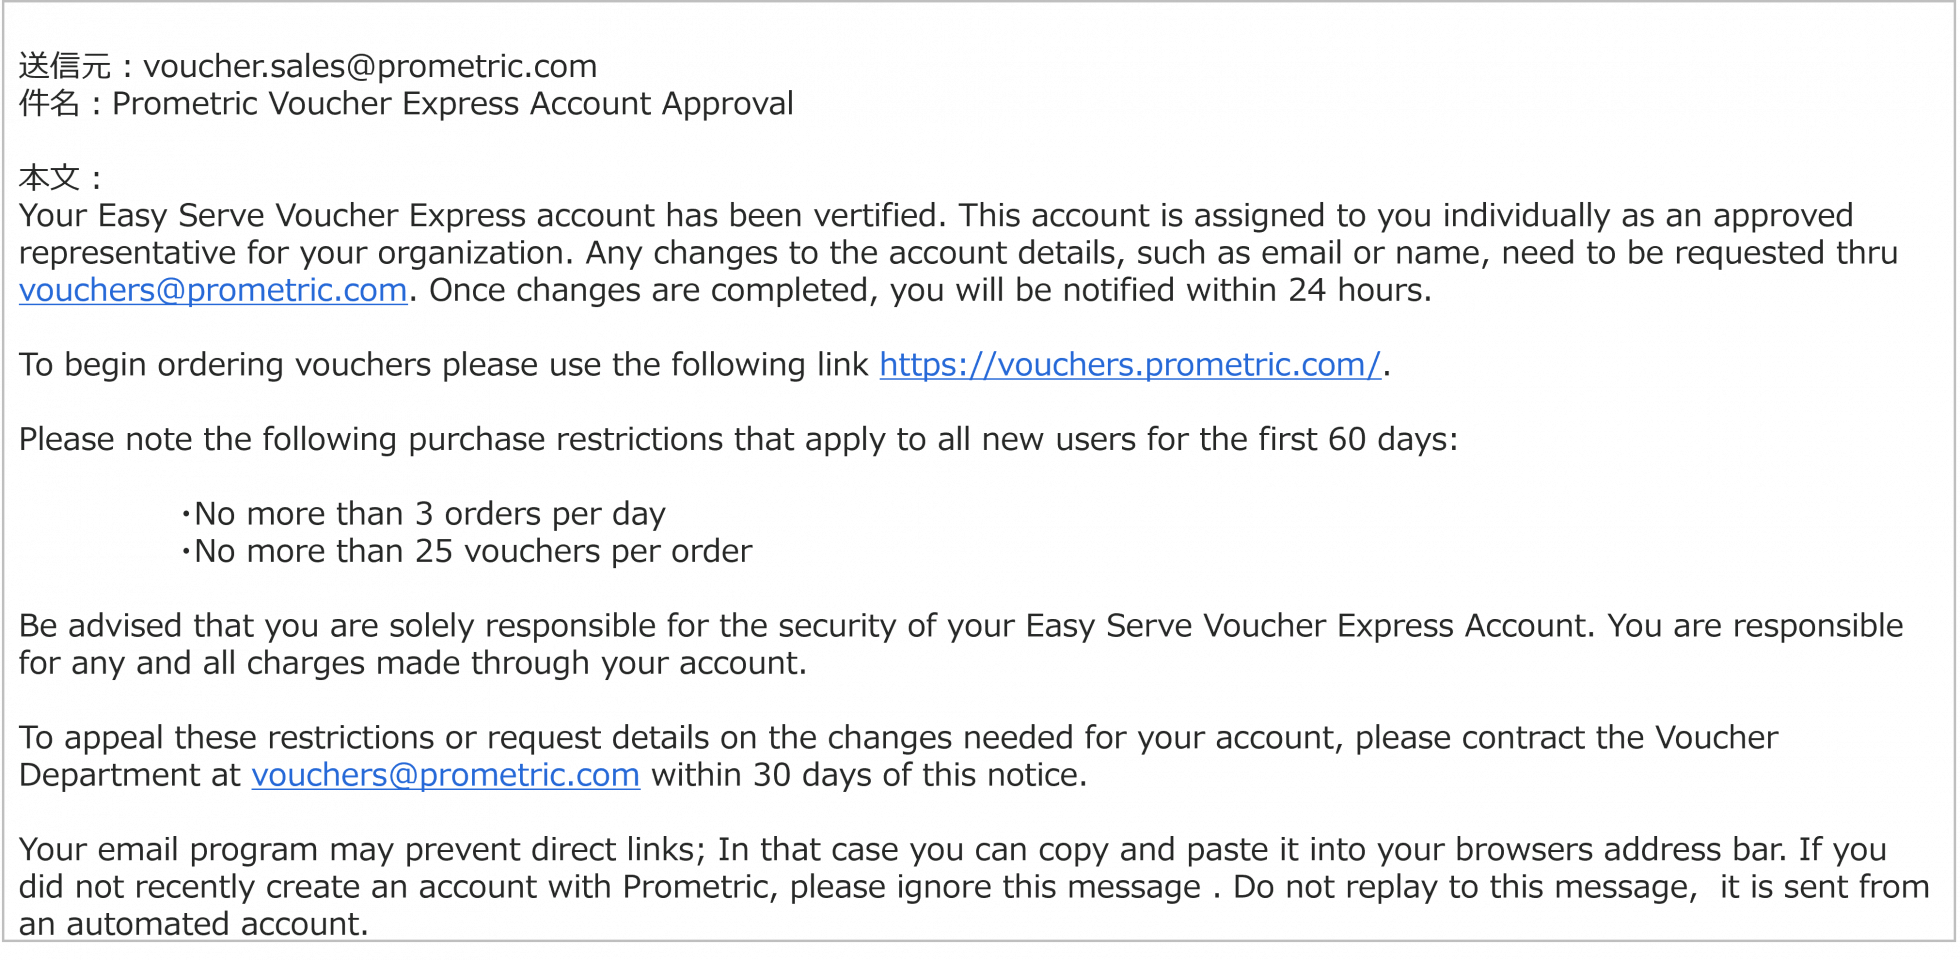 Examination ticket_account creation notification email